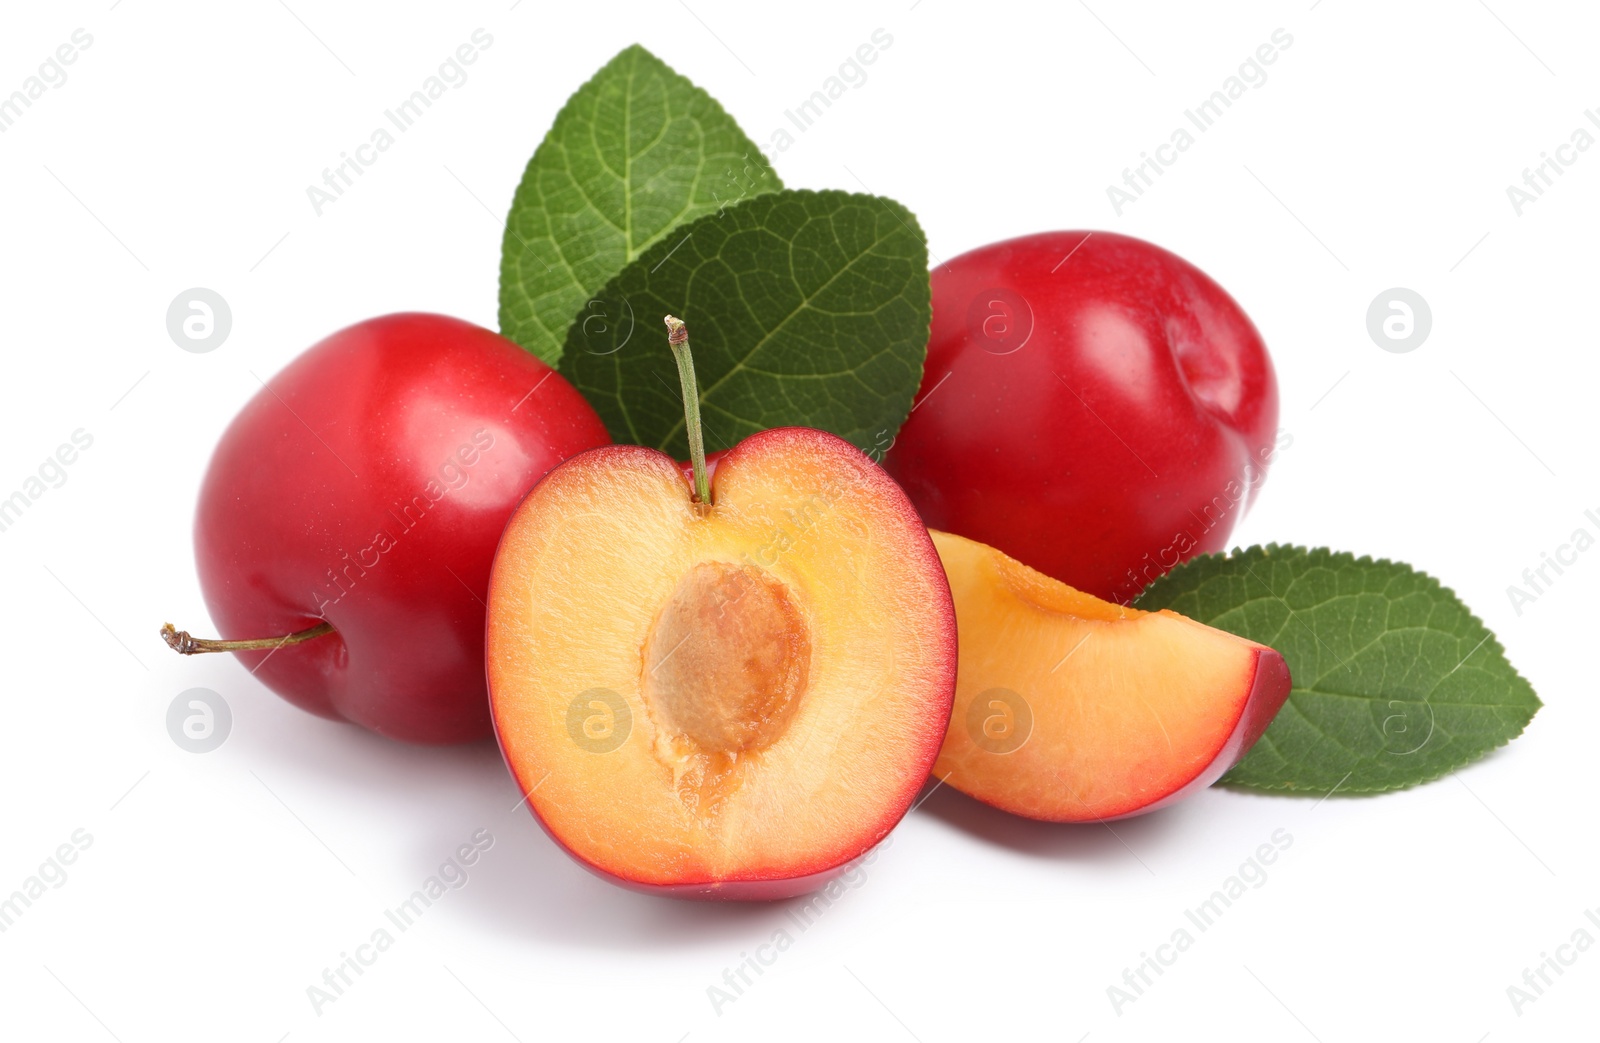 Photo of Cut and whole cherry plums with leaves on white background